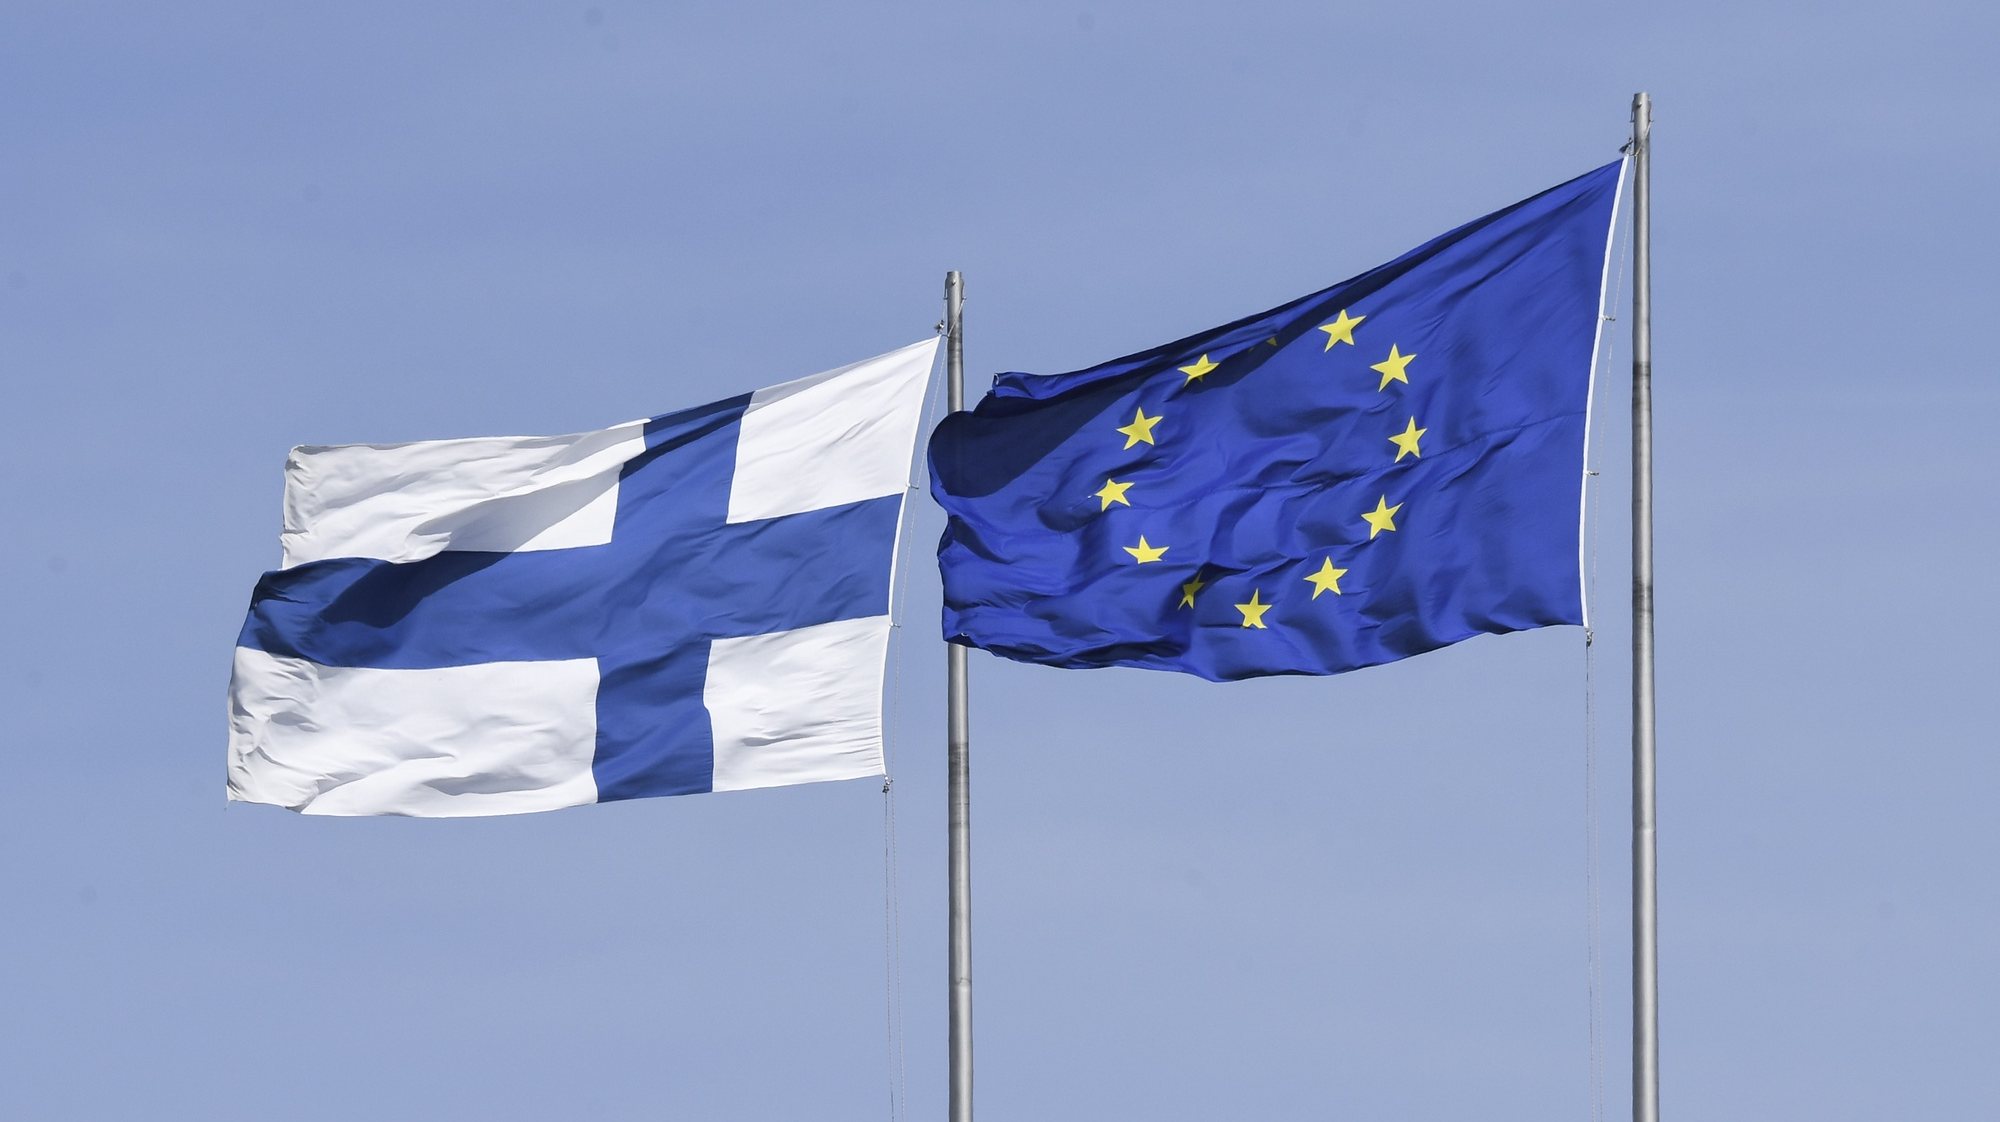 epa07557935 Finland&#039;s national flag (L) and the EU flag (R) seen during the Europe Day celebrations in Finnish capital Helsinki, Finland, 09 May 2019. The Europe Day event was co-organized by the Finnish Foreign Ministry, Finnish Broadcasting Corporation YLE, European Movement Finland, Young European Federalists Europe, and European Commission as well as the  European Parliament. The Europe Day has been celebrated 09 May since 1985 and comes ahead of the European Parliament elections, to be held between 23 and 26 May 2019.  EPA/KIMMO BRANDT